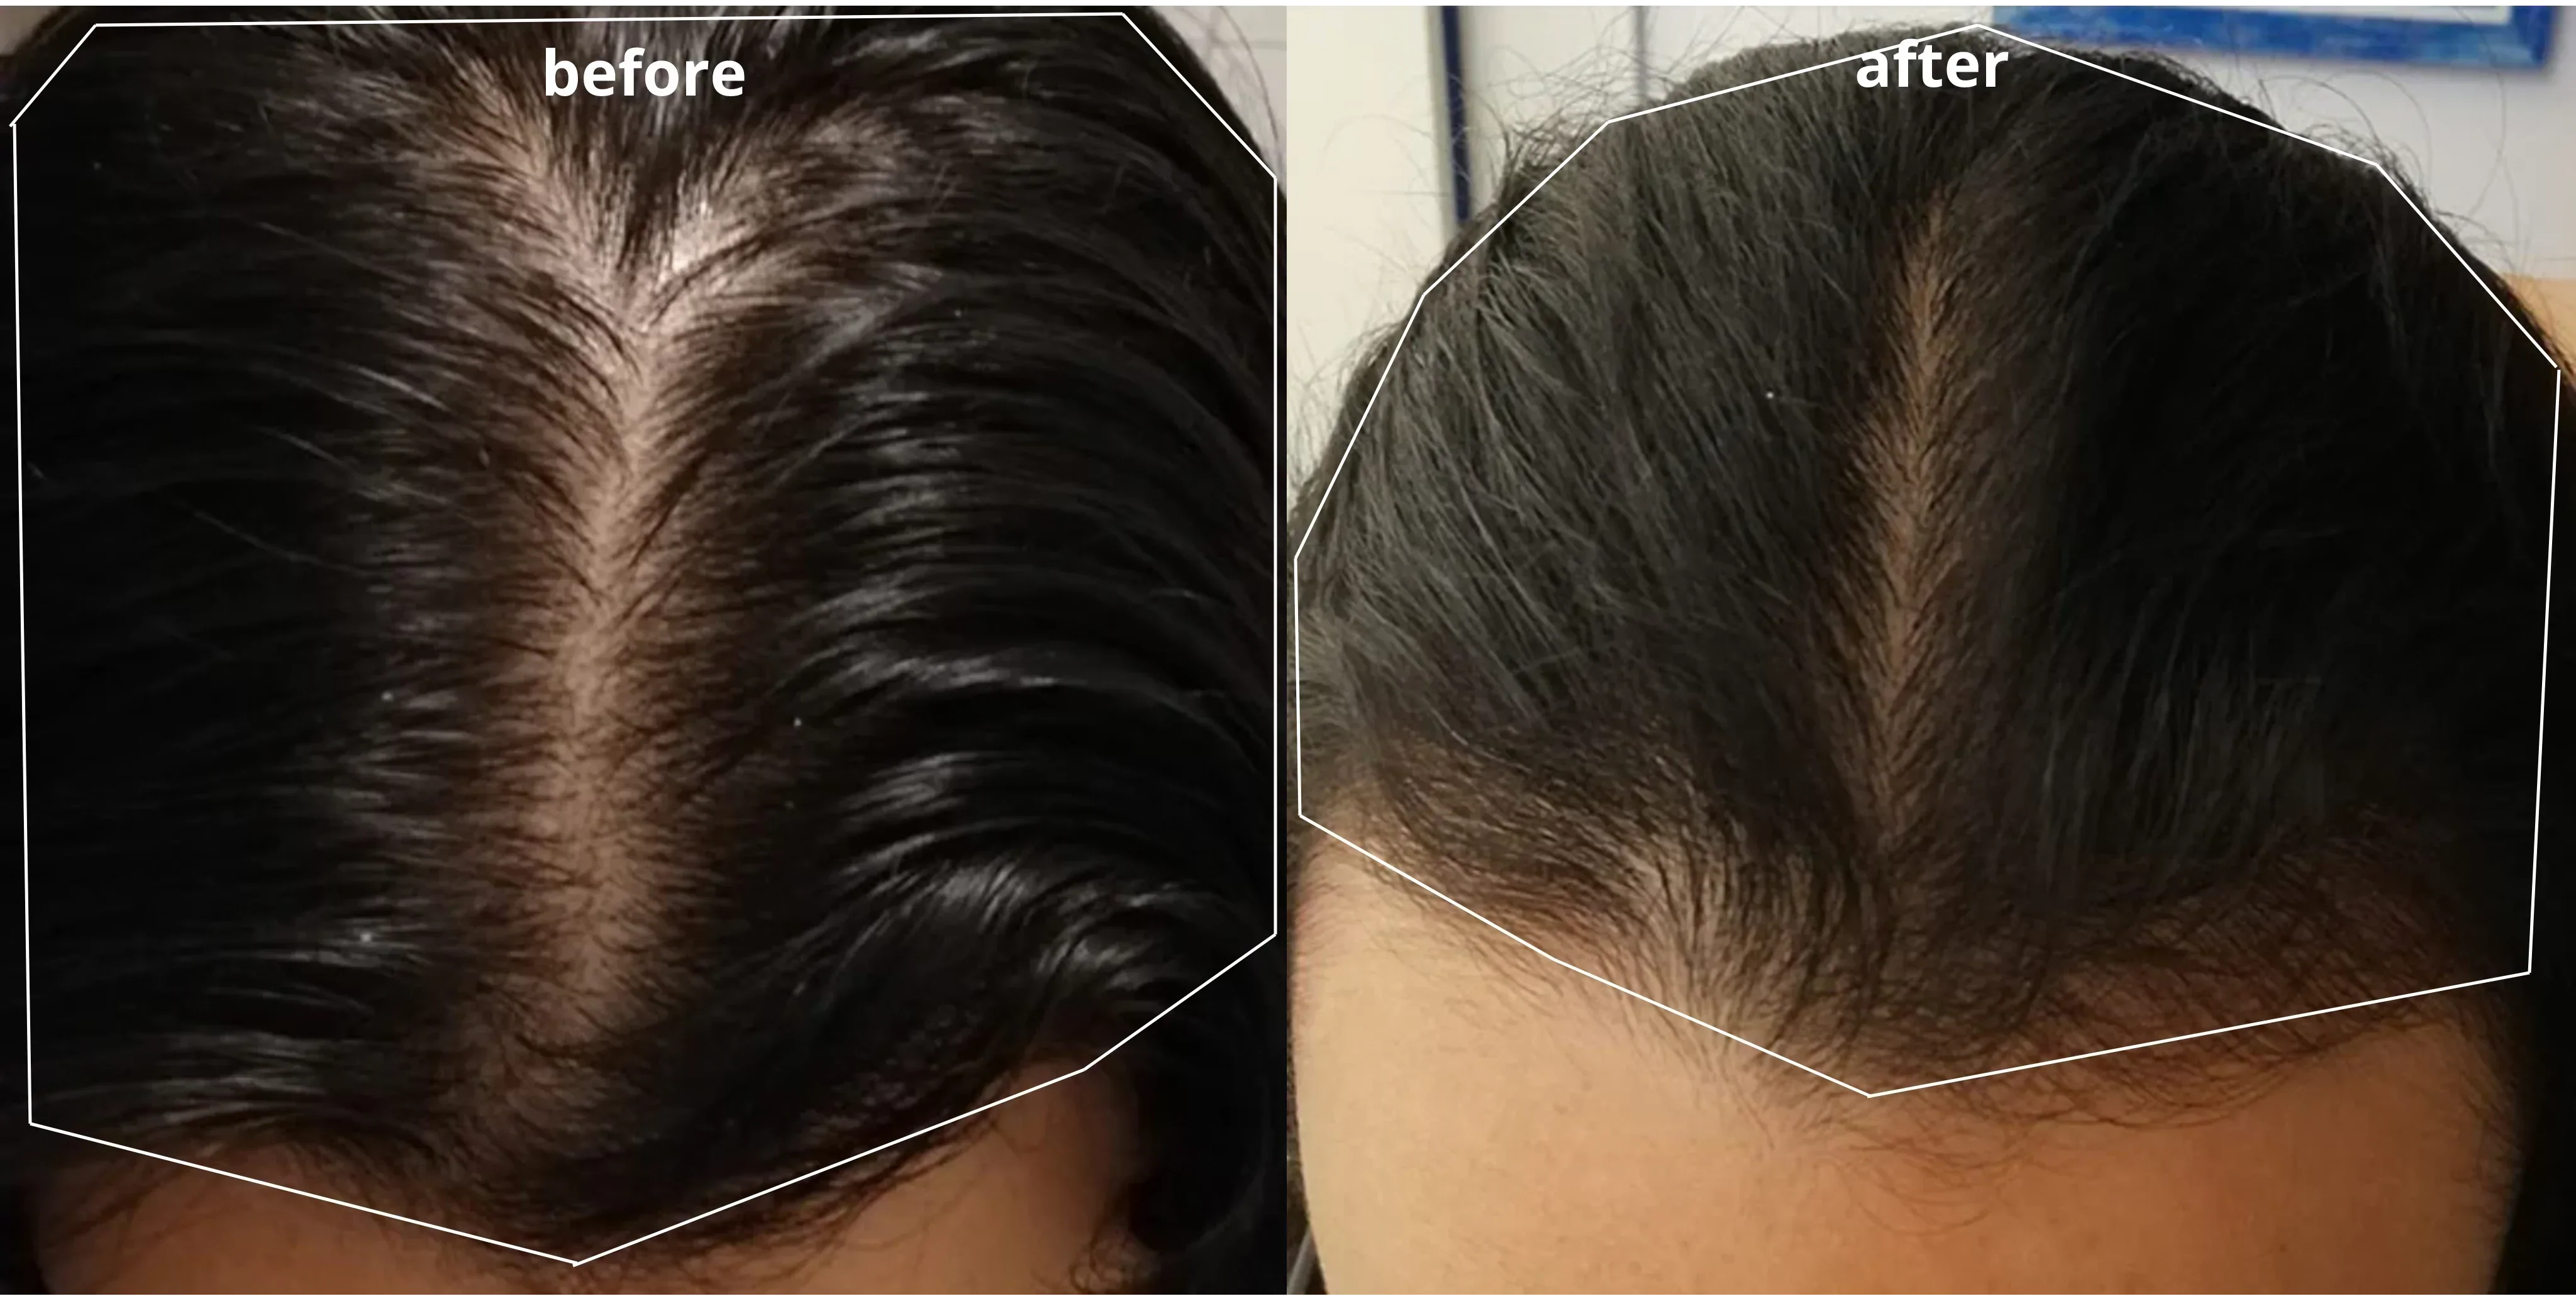 Traction Alopecia: What to Do to Prevent it and Treat It